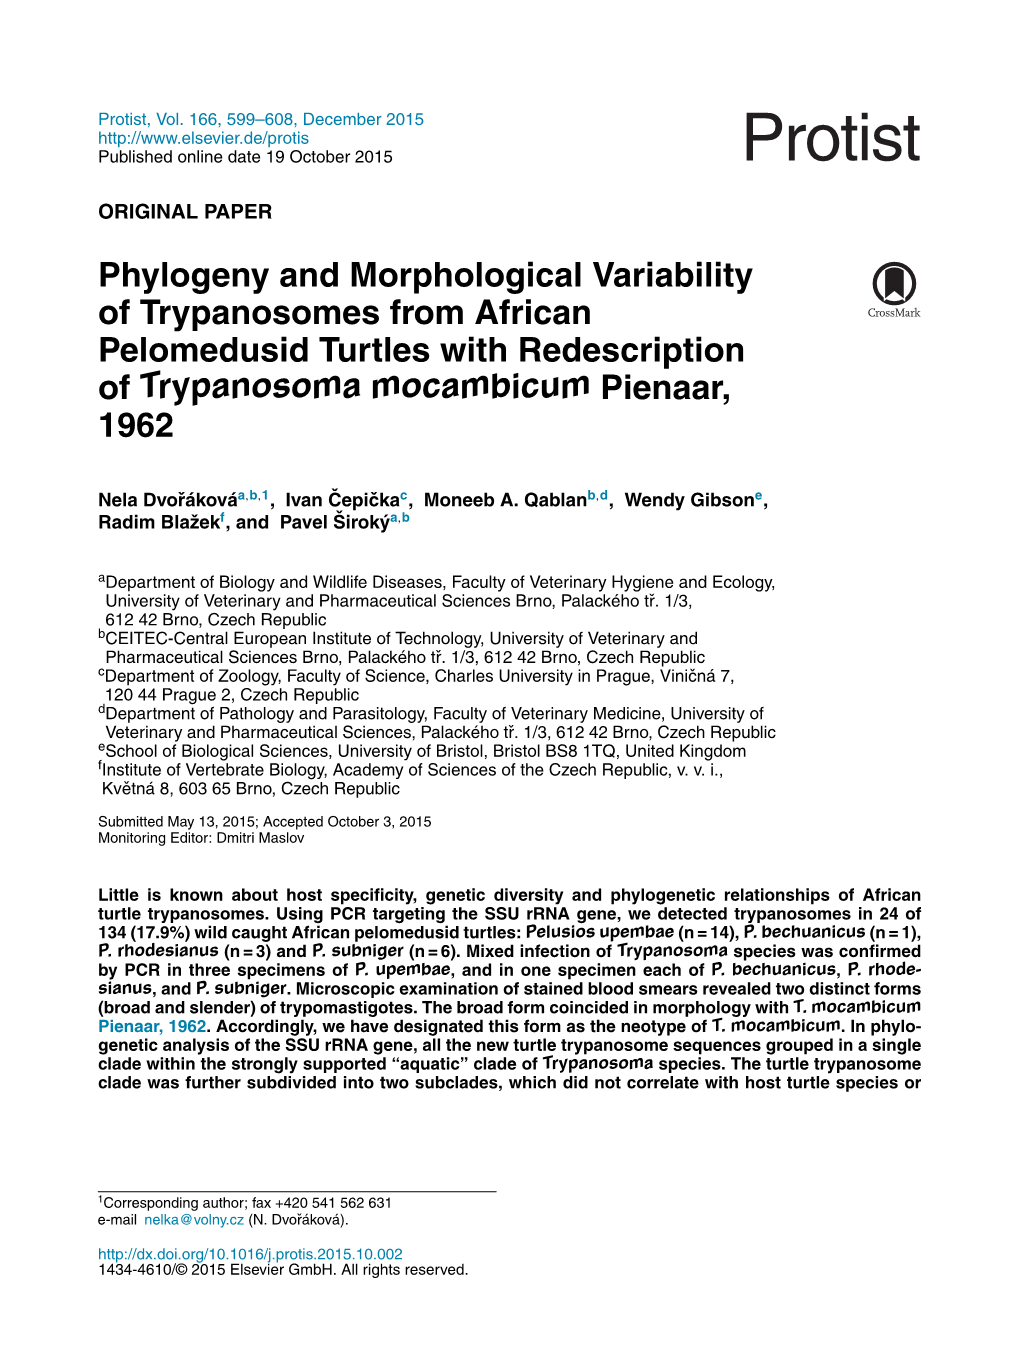 Phylogeny and Morphological Variability of Trypanosomes From